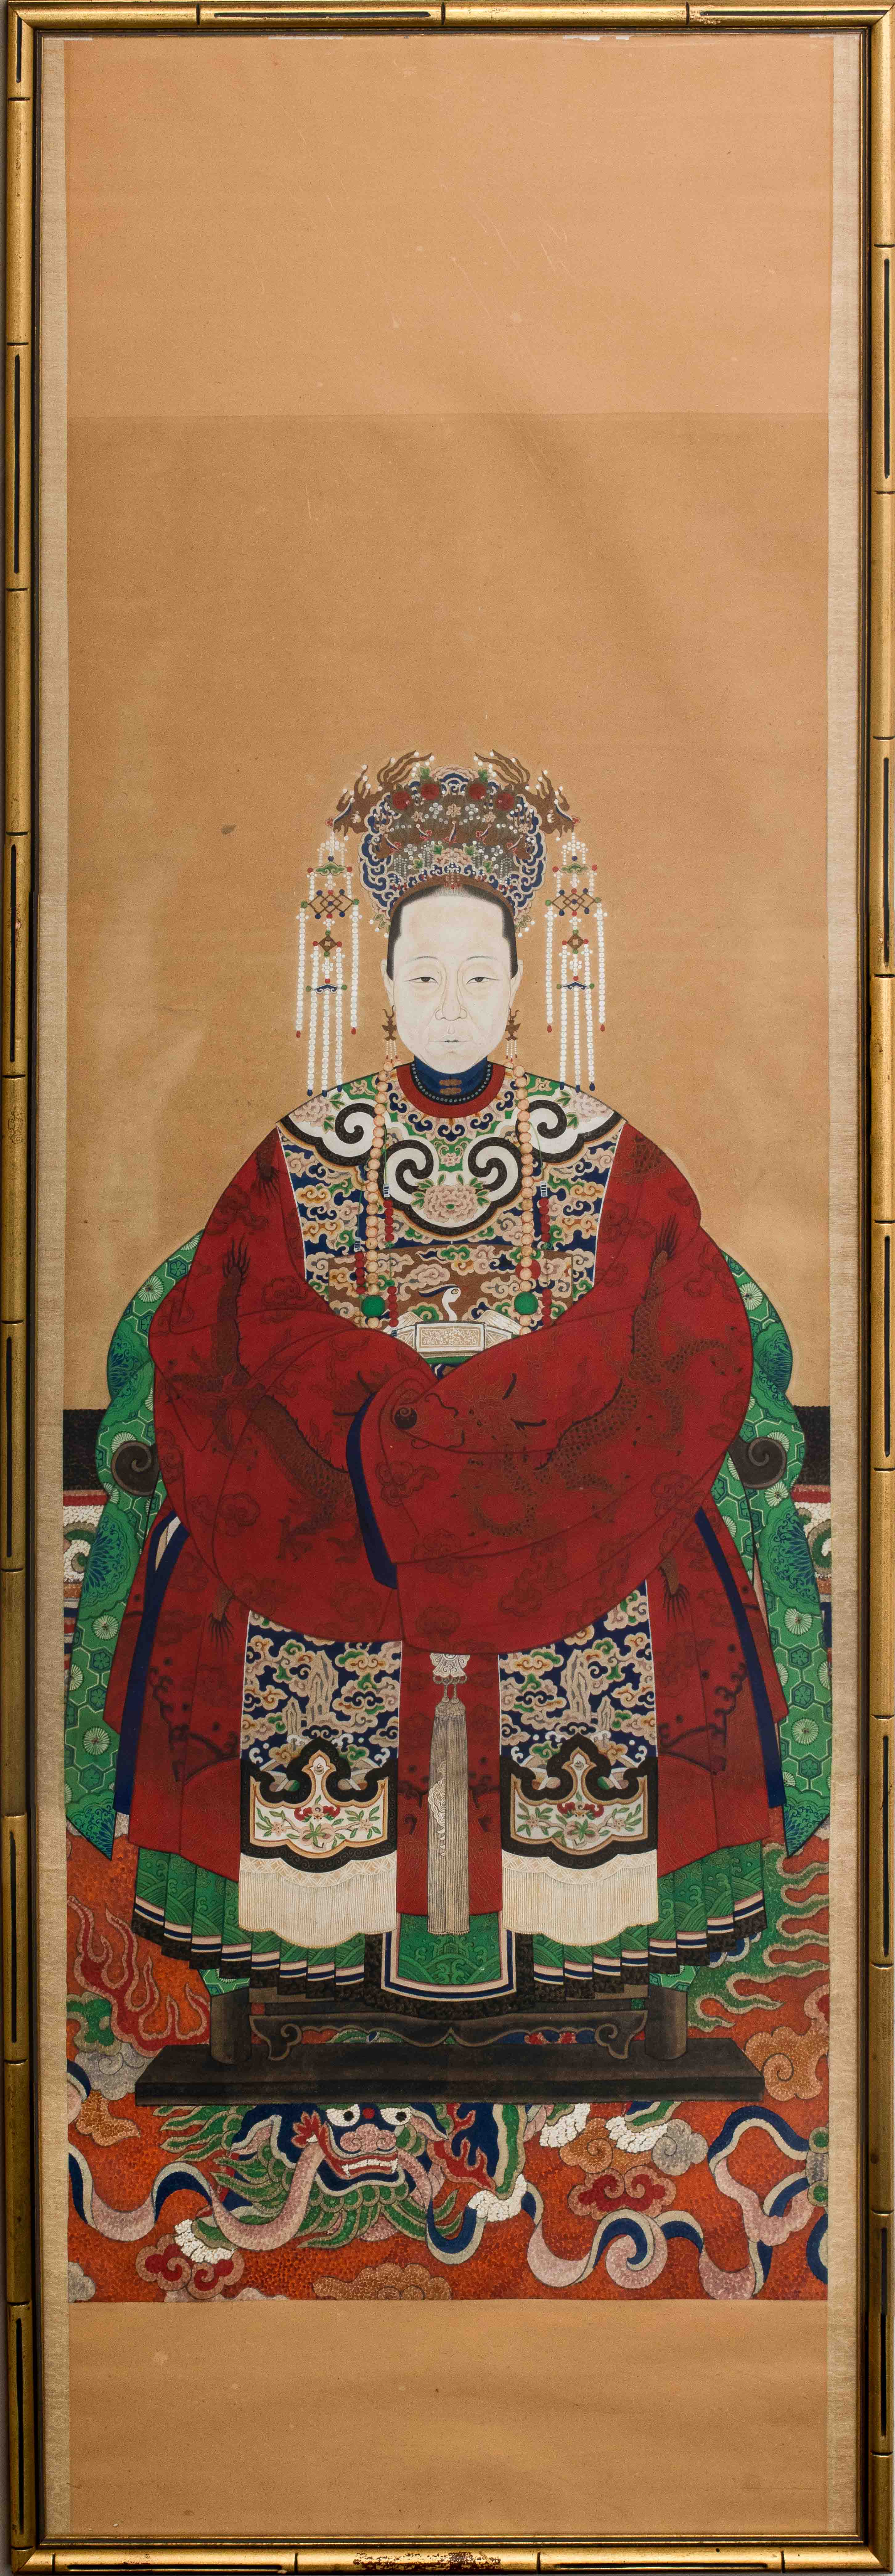 CHINESE ANCESTRAL PORTRAIT ON PAPER 2d1e6f